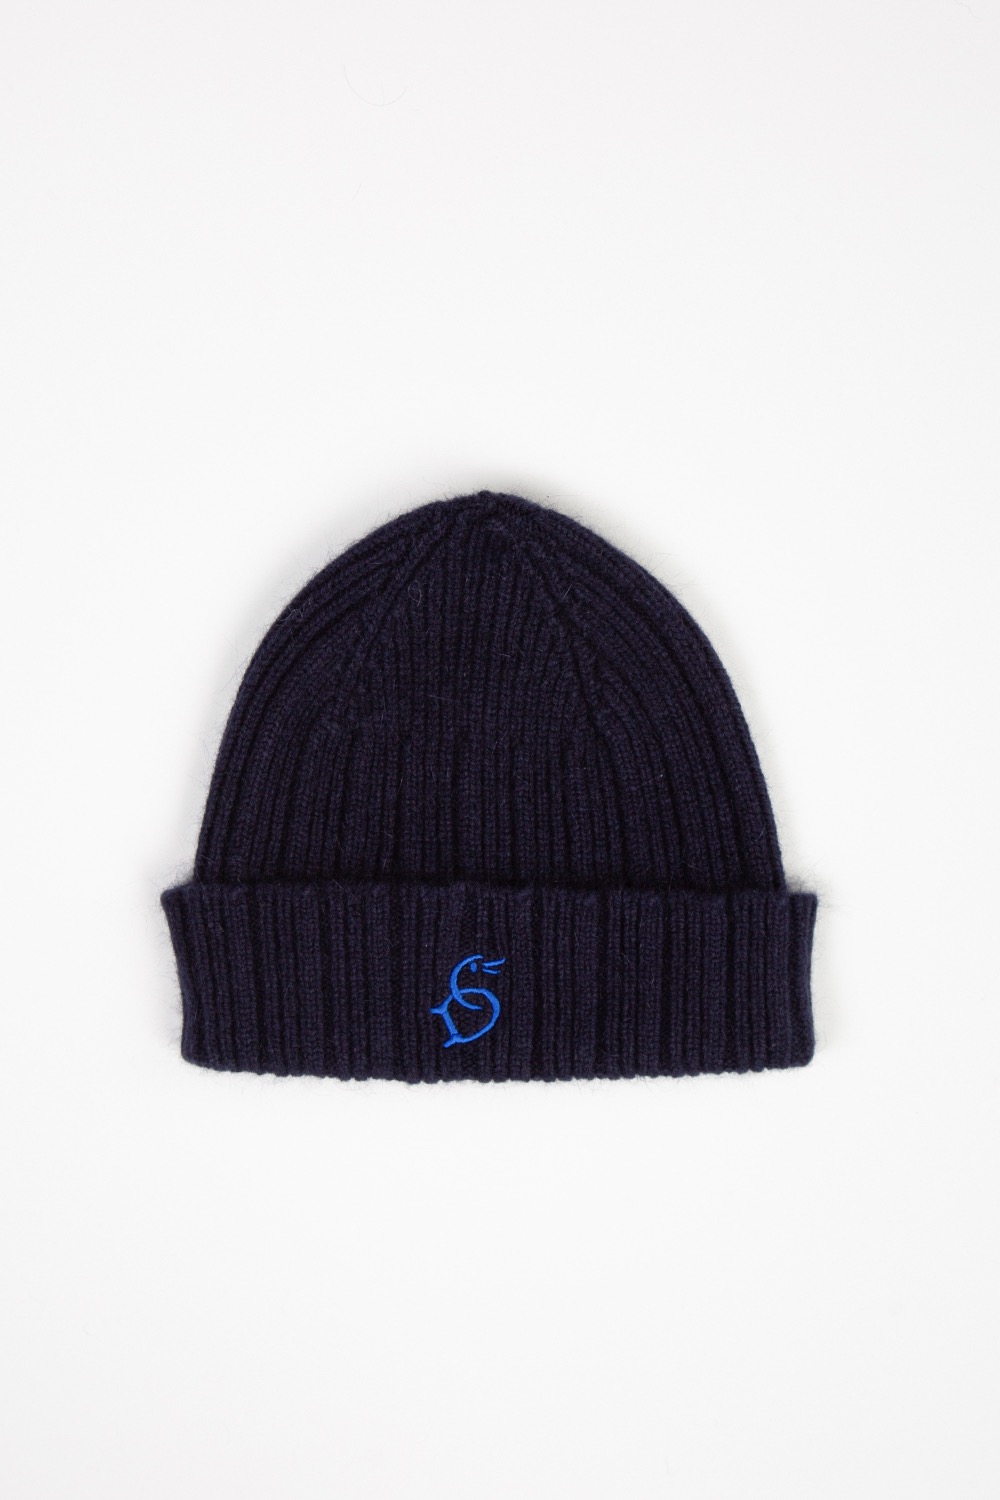 (CARRY OVER) NAVY ANGORA LAMBSWOOL RIBBED KNIT CAP